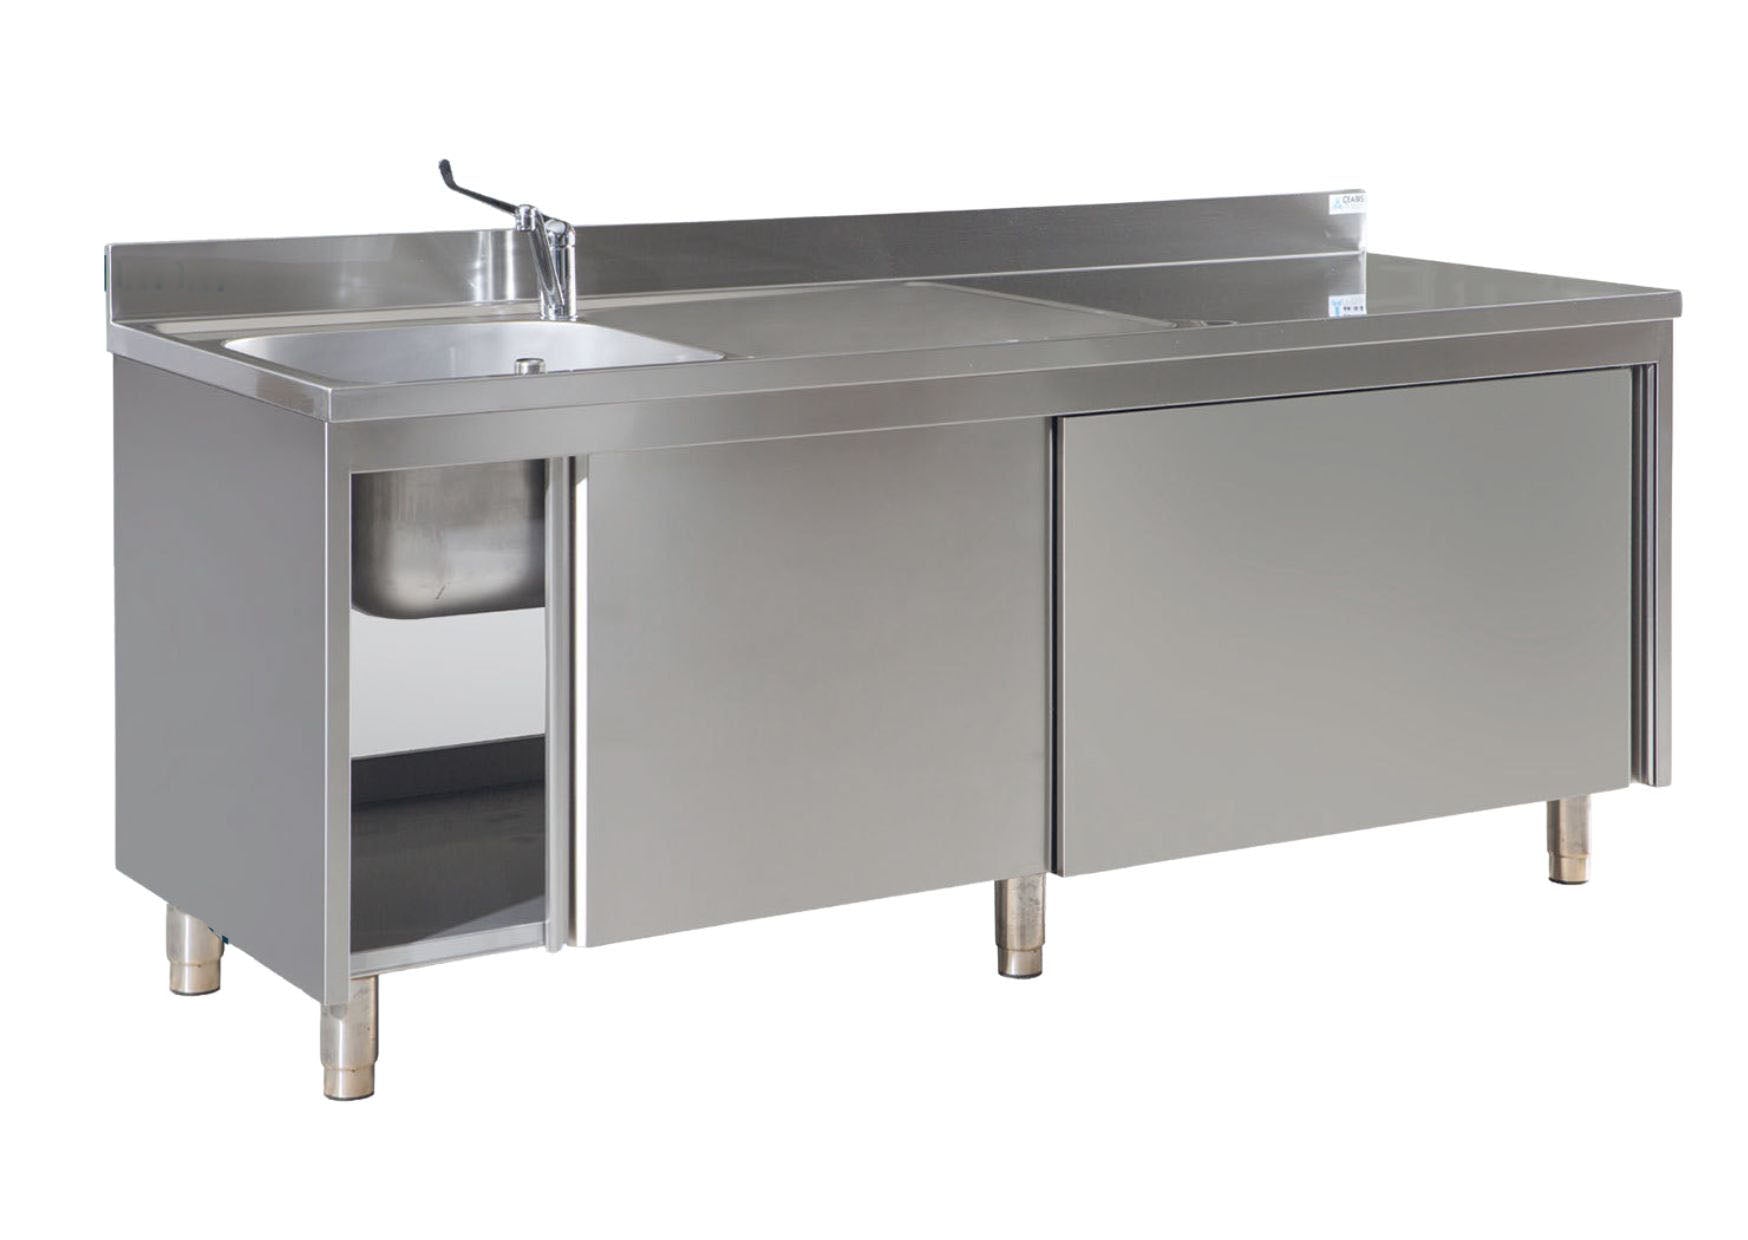 Stainless steel cupboard table with sink left